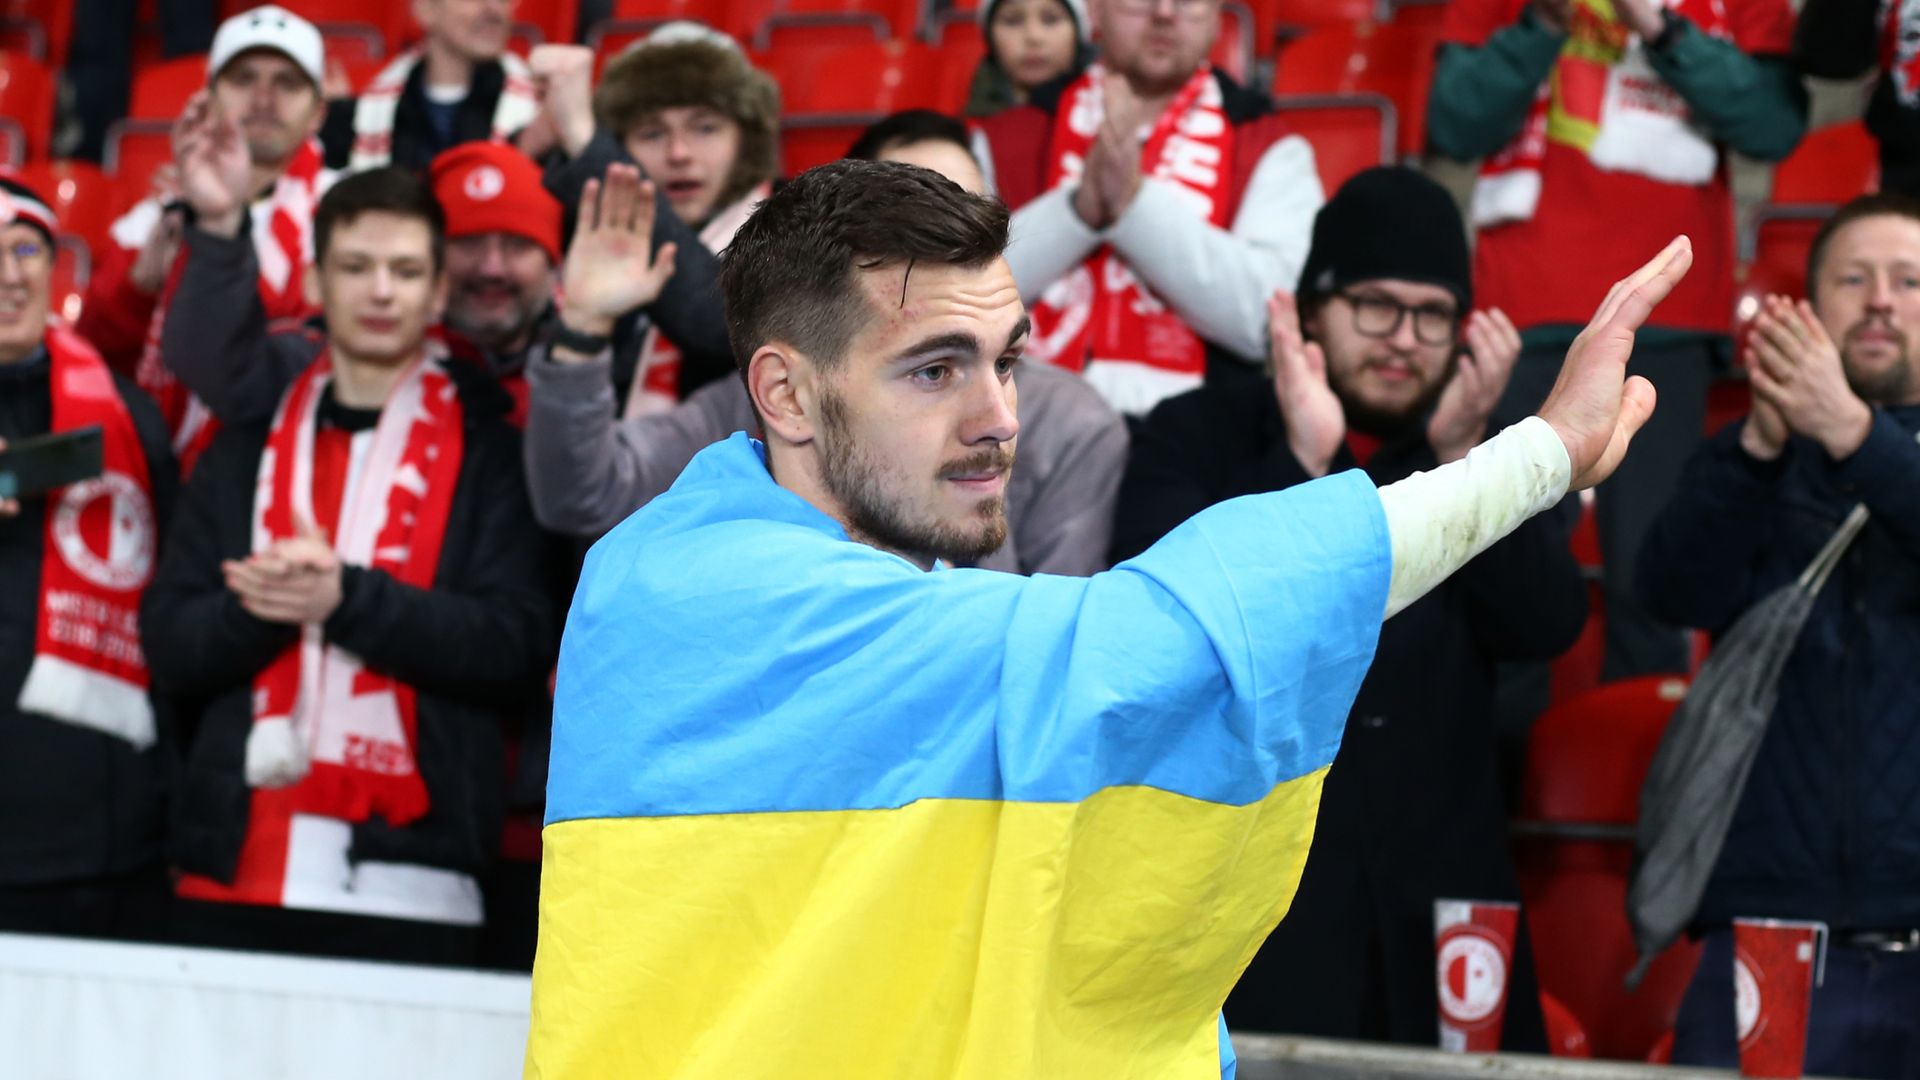 Europa League round-up: Clubs show support for Ukraine